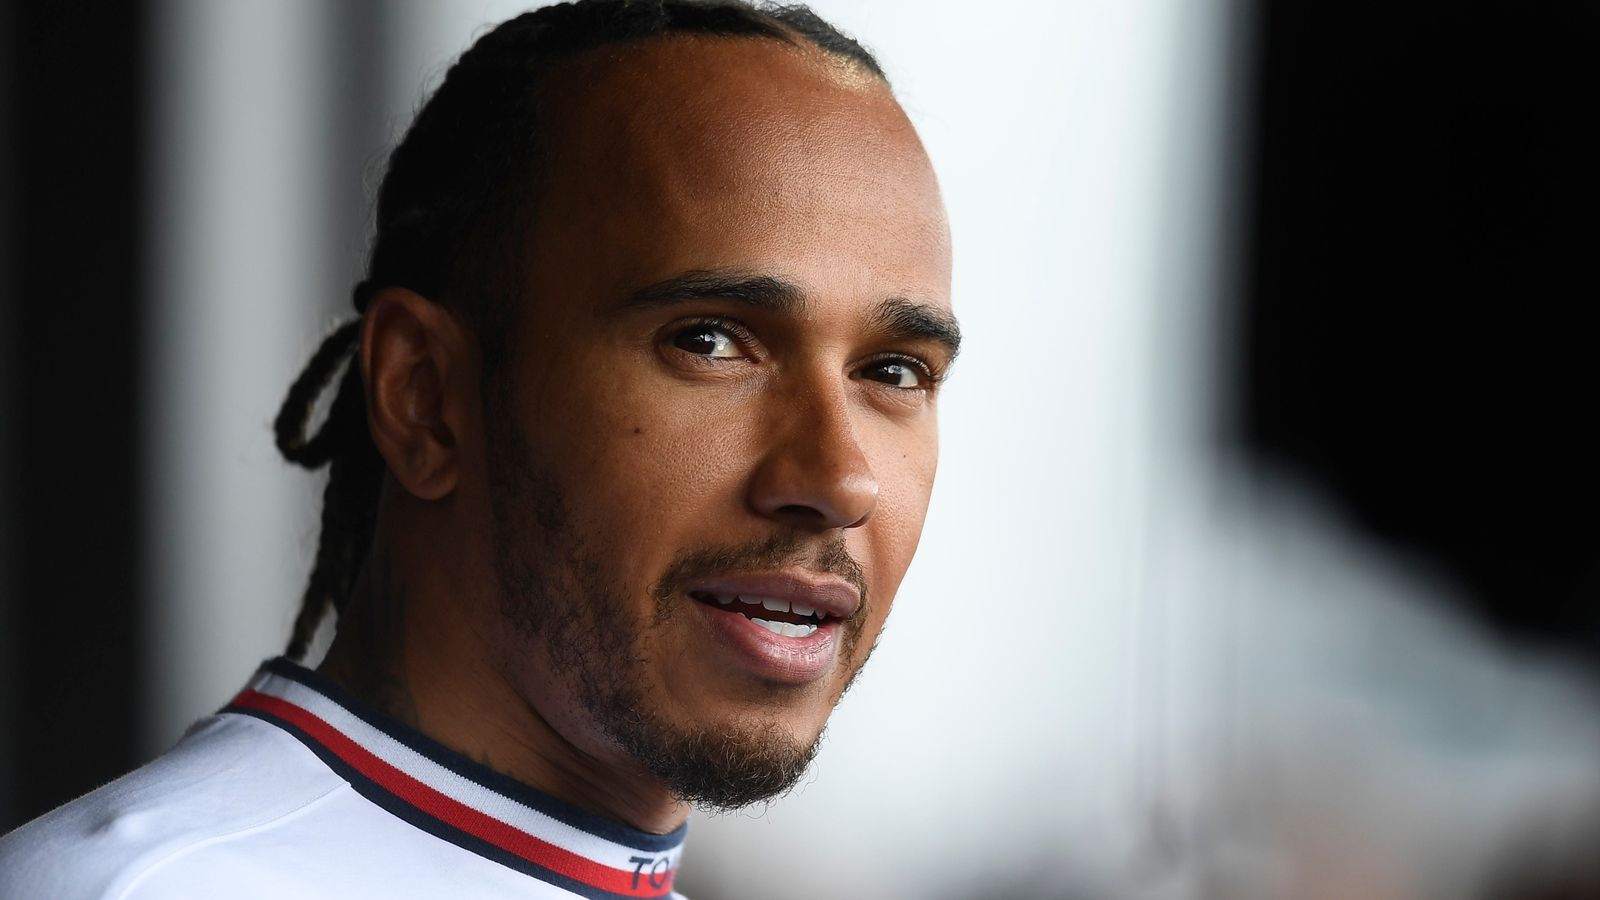 British GP: Lewis Hamilton ‘gutted’ after finishing fifth in dramatic Silverstone qualifying